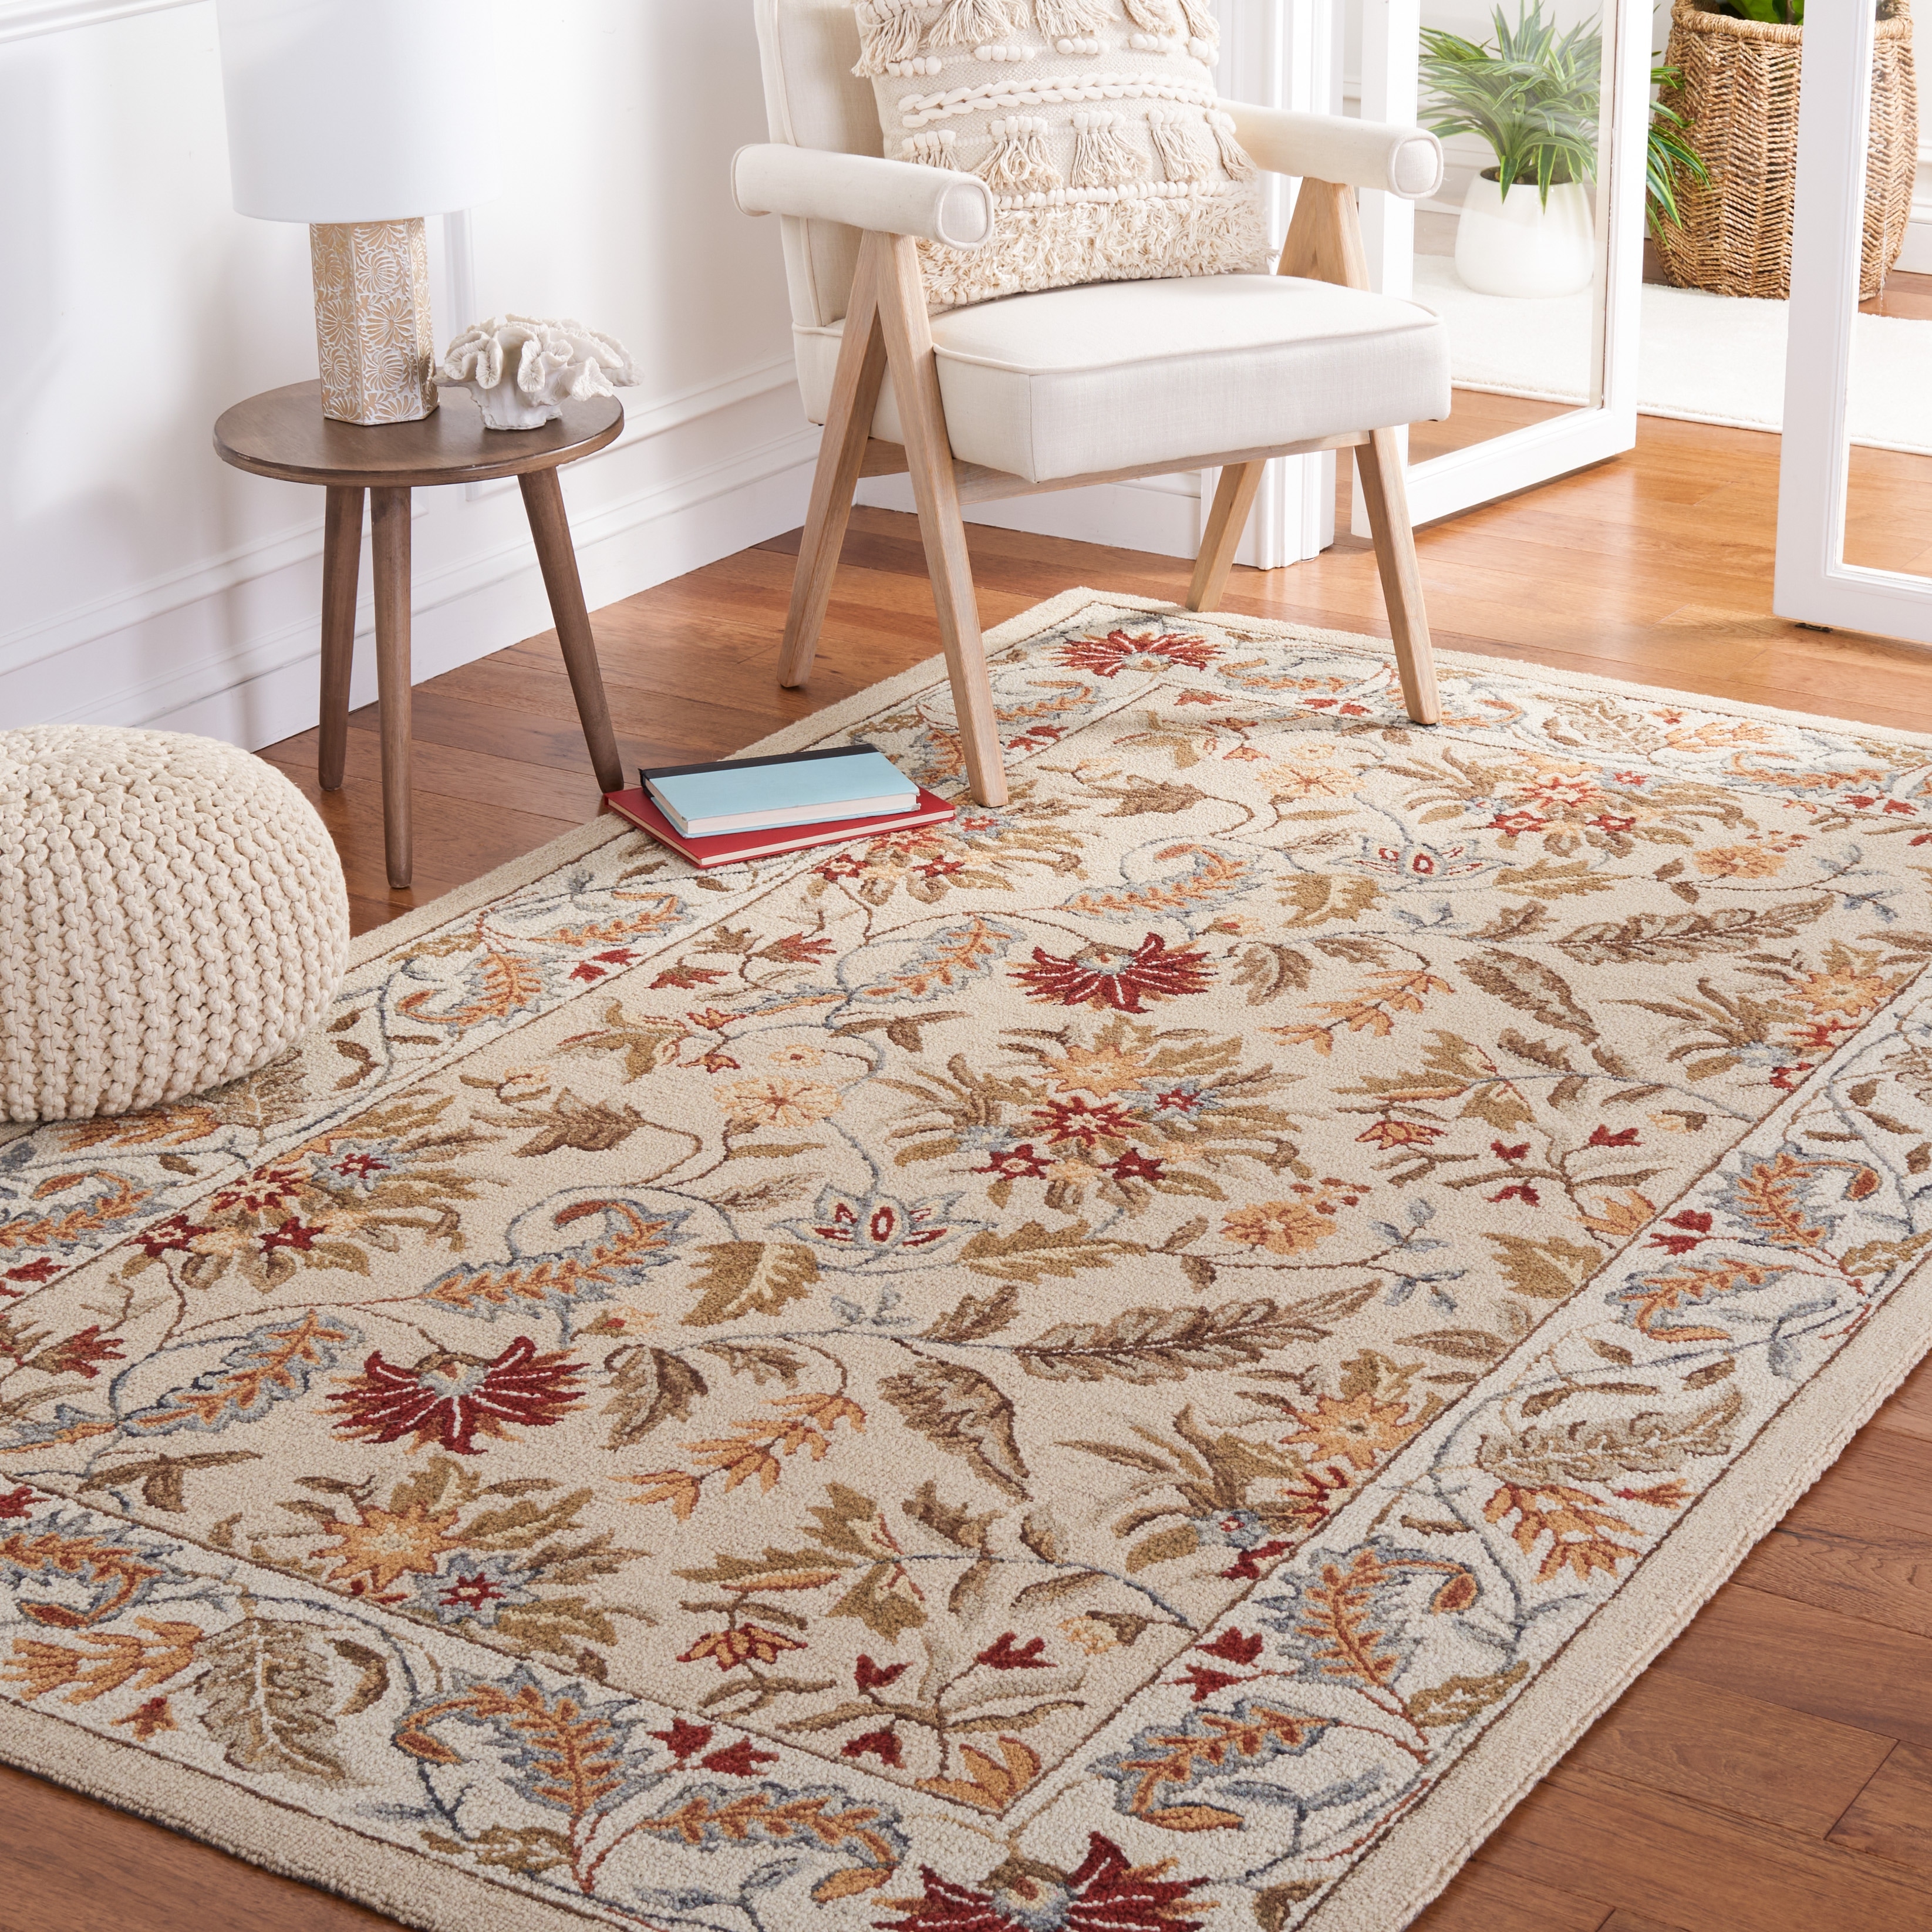 Entryway, Hand-Hooked Rugs - Bed Bath & Beyond